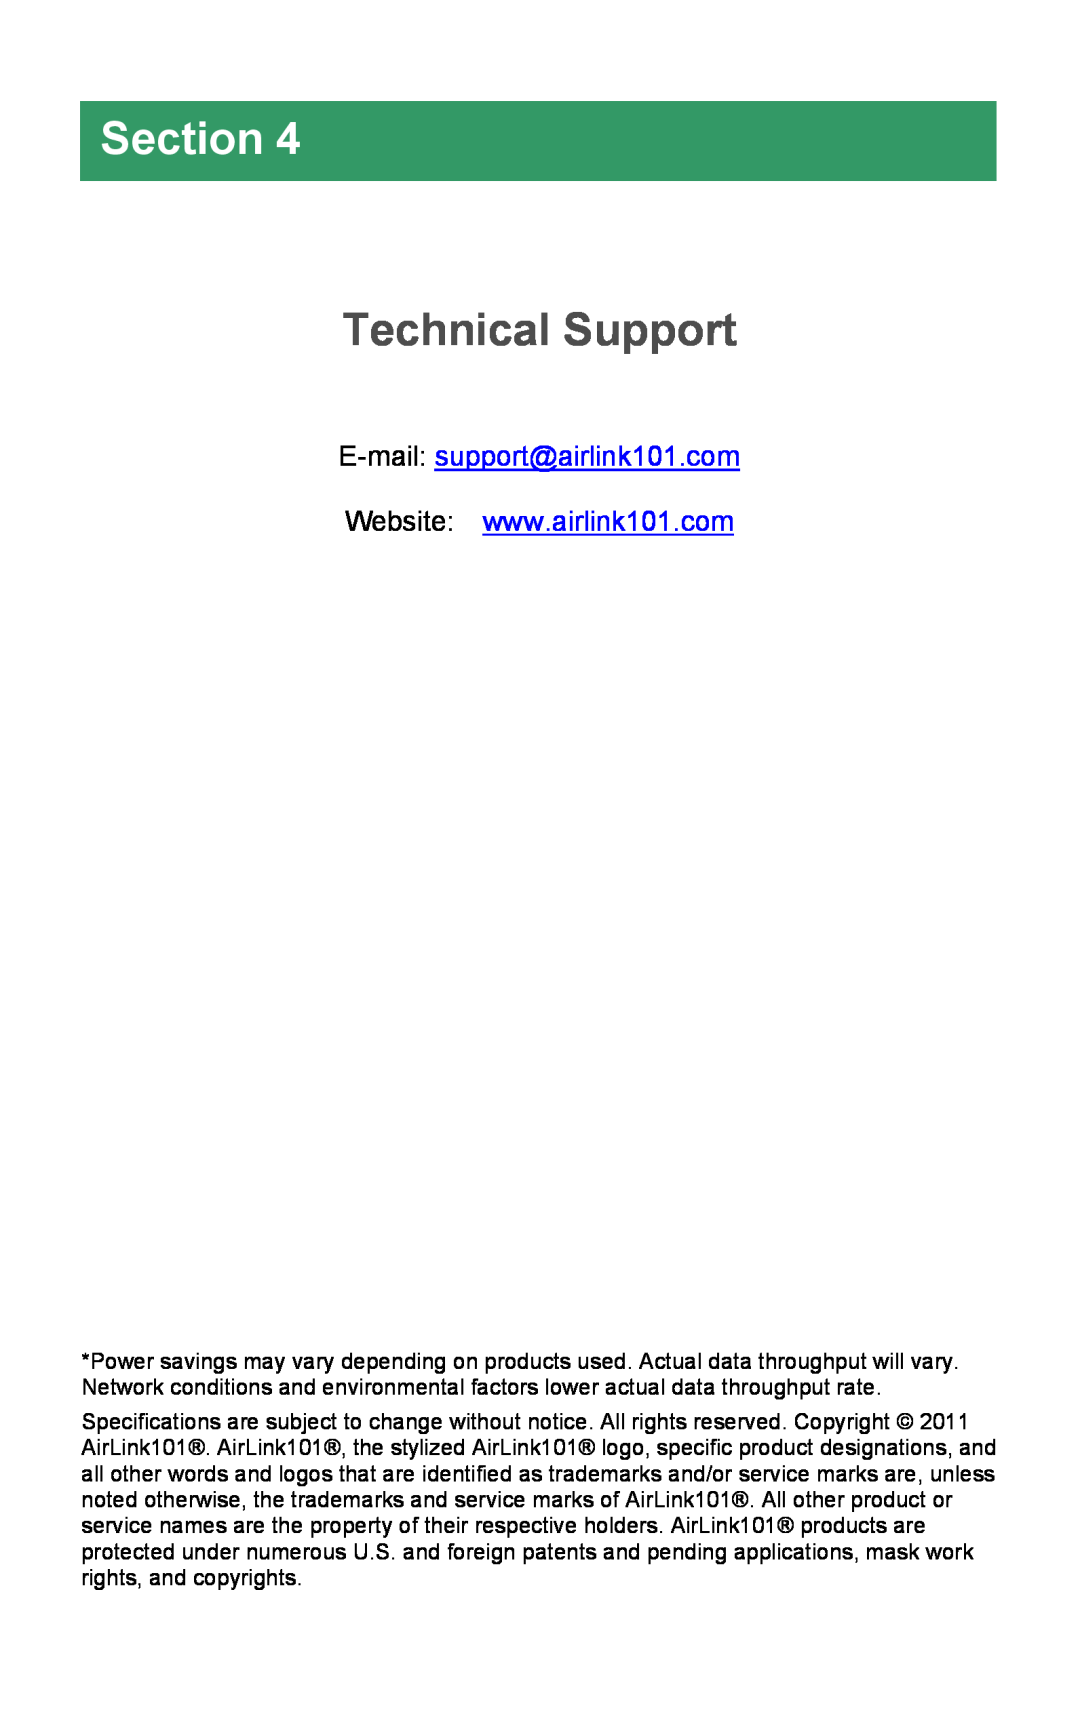 Airlink101 ASW308 manual Technical Support, Section, E-mail support@airlink101.com 